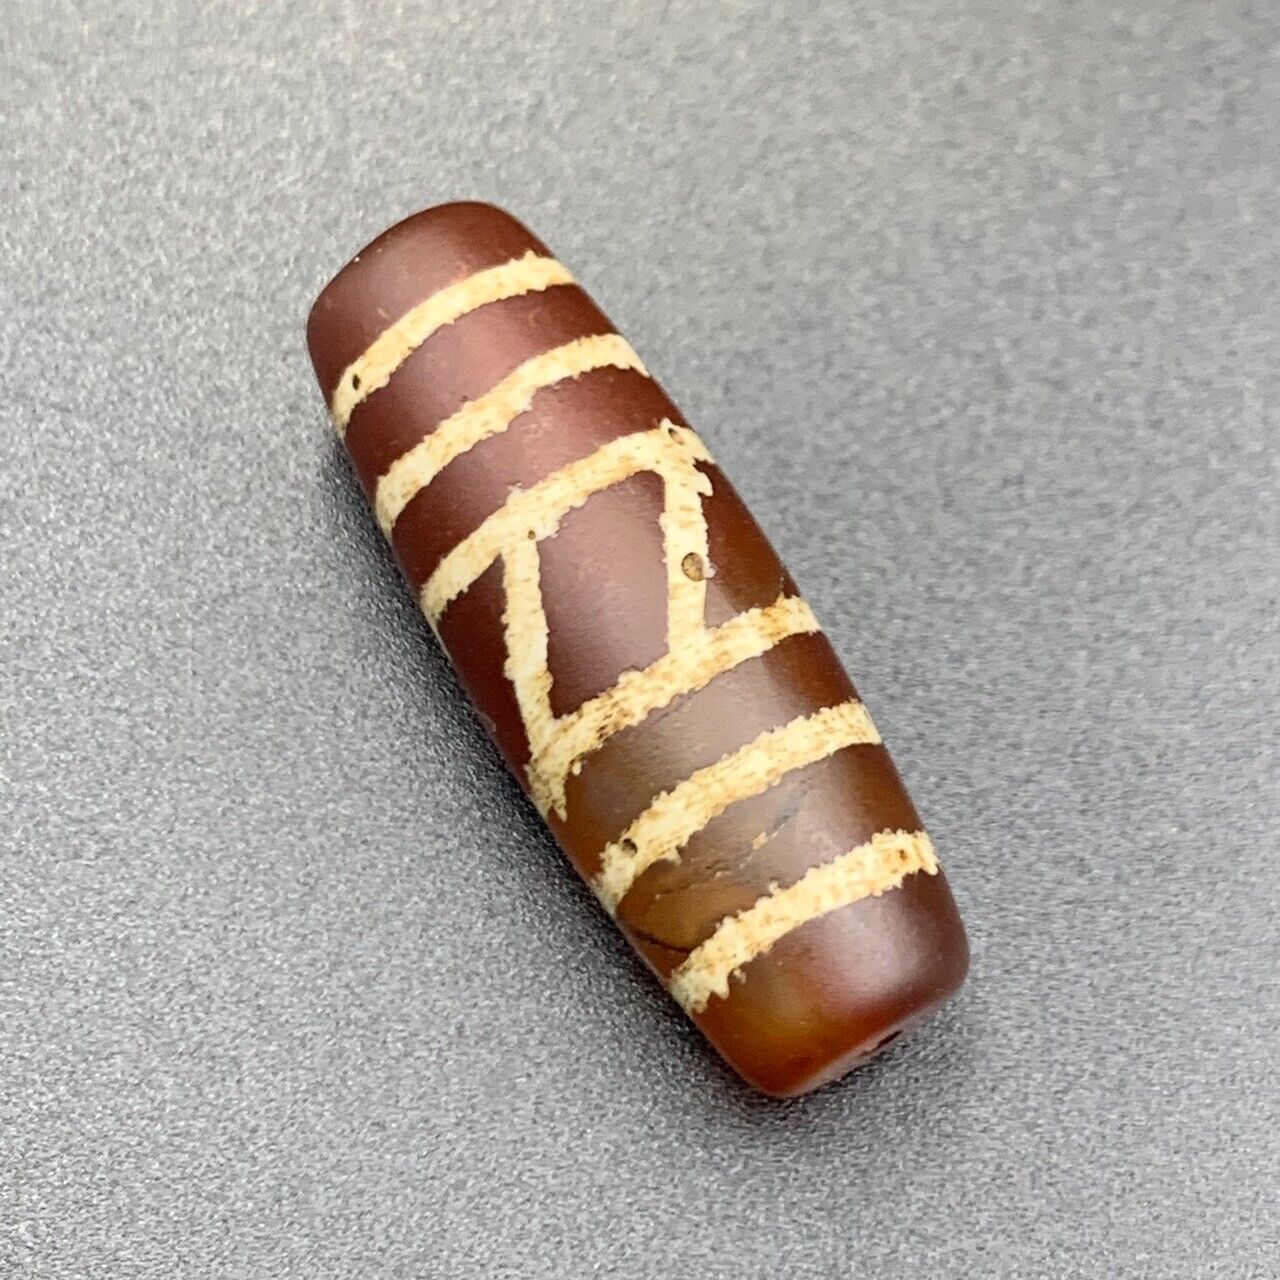 Wonderful Antique Tibetan Etched Agate Bead,Collectible Antique Etched Bead - Image 2 of 4